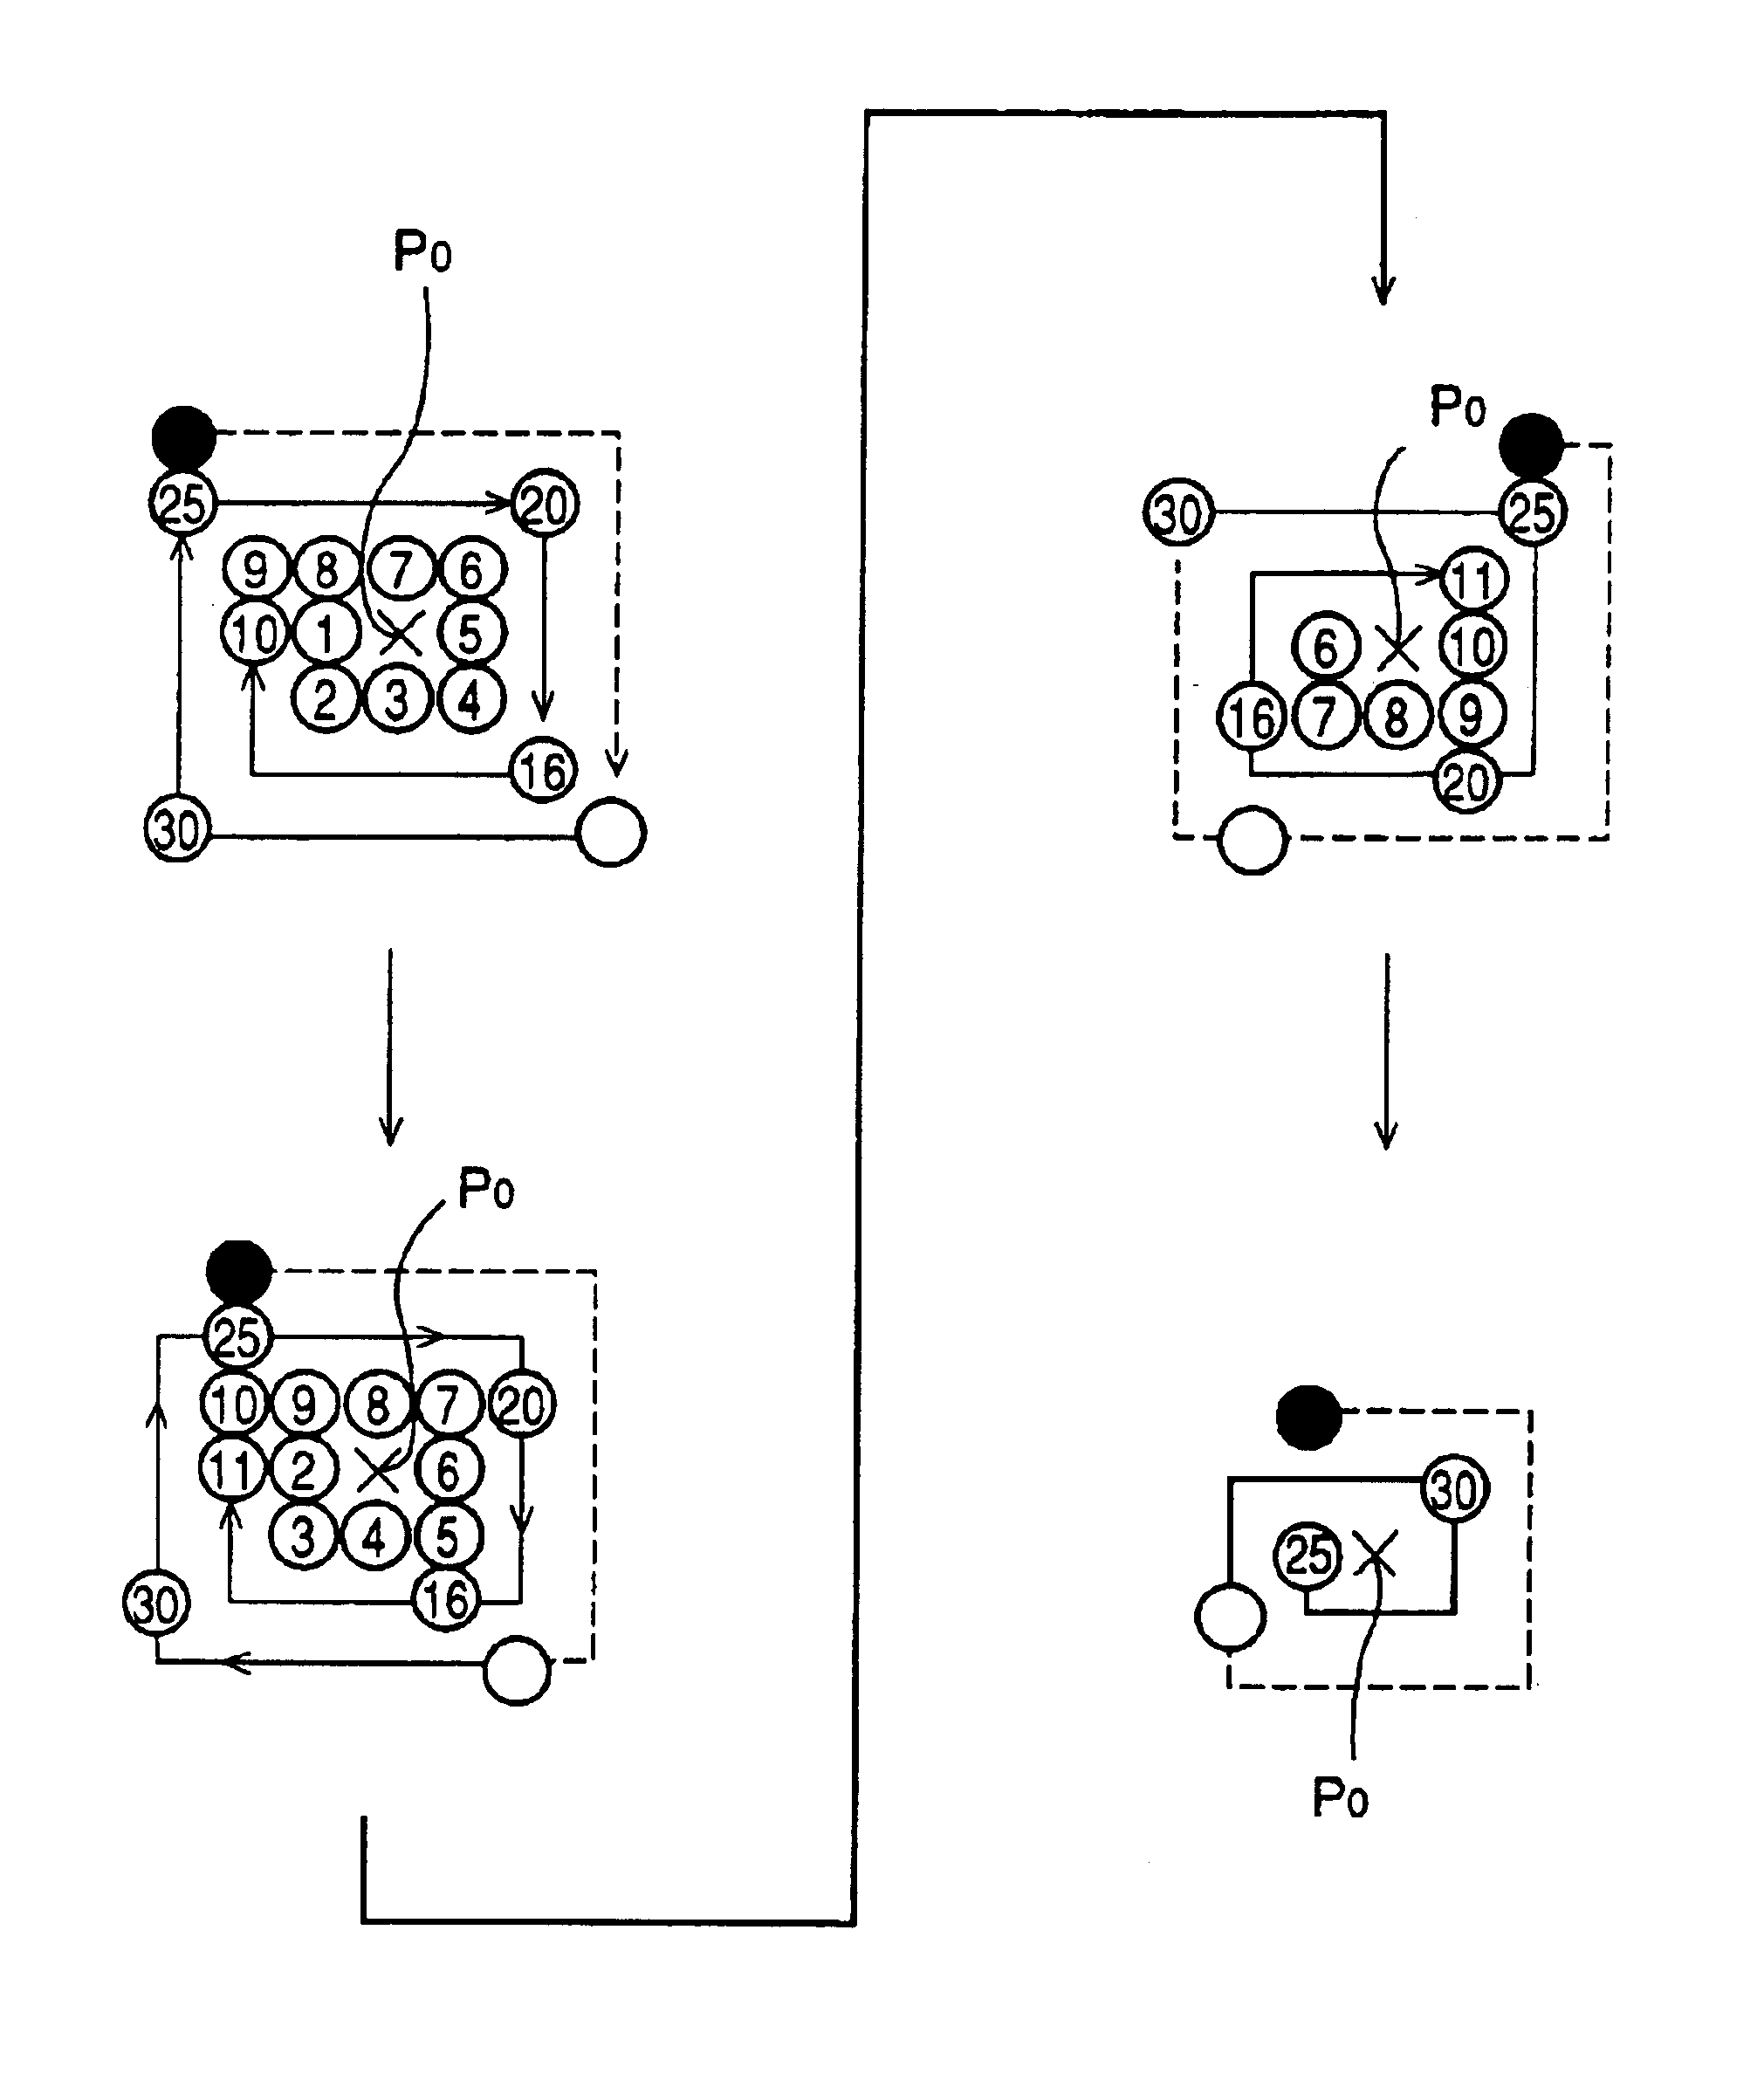 Display control system causing image on display screen to disappear and reappear in a friendly manner to user